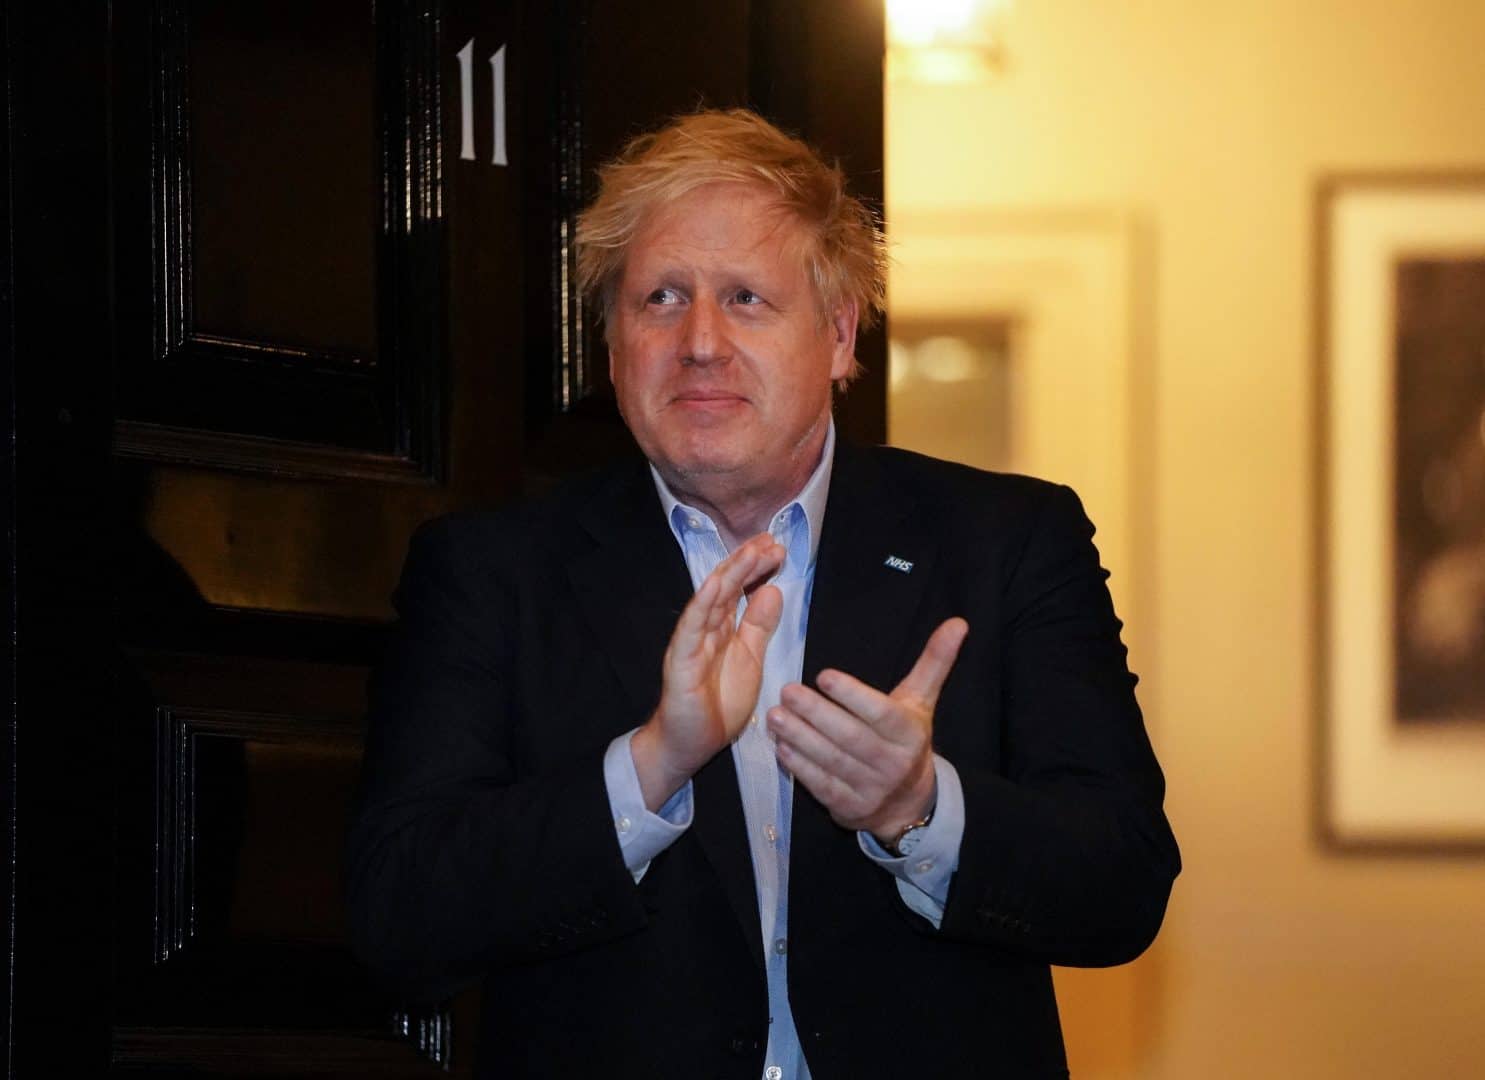 Campaign launched to make #ClapForBoris happen tonight